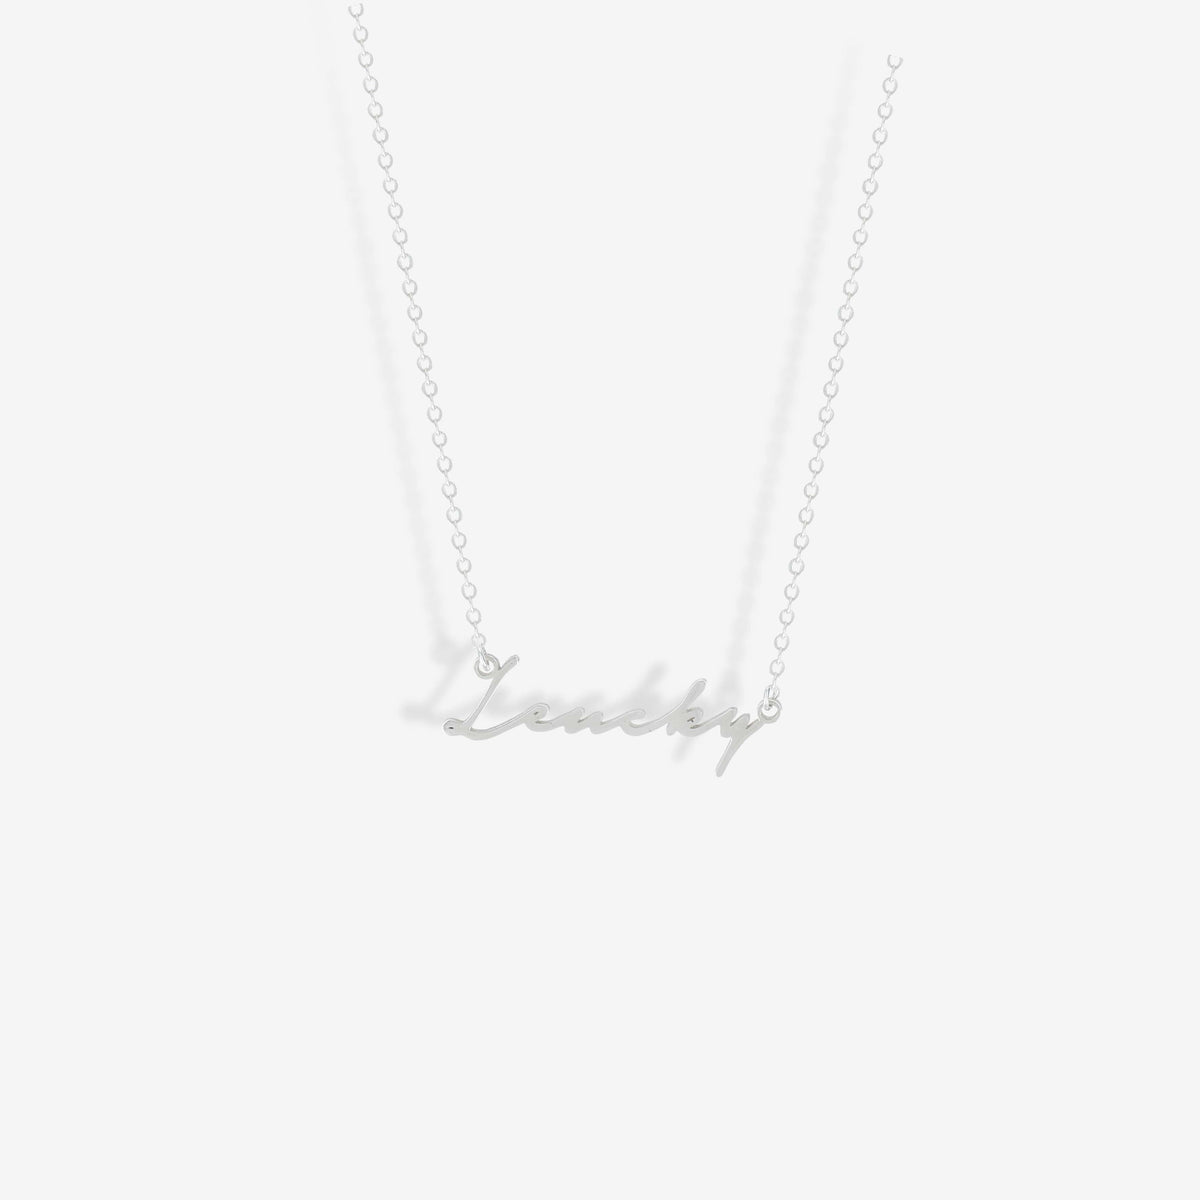 Custom Name Necklace Necklace Custom Paw Jewelry Sterling Silver 14''/35.5cm 